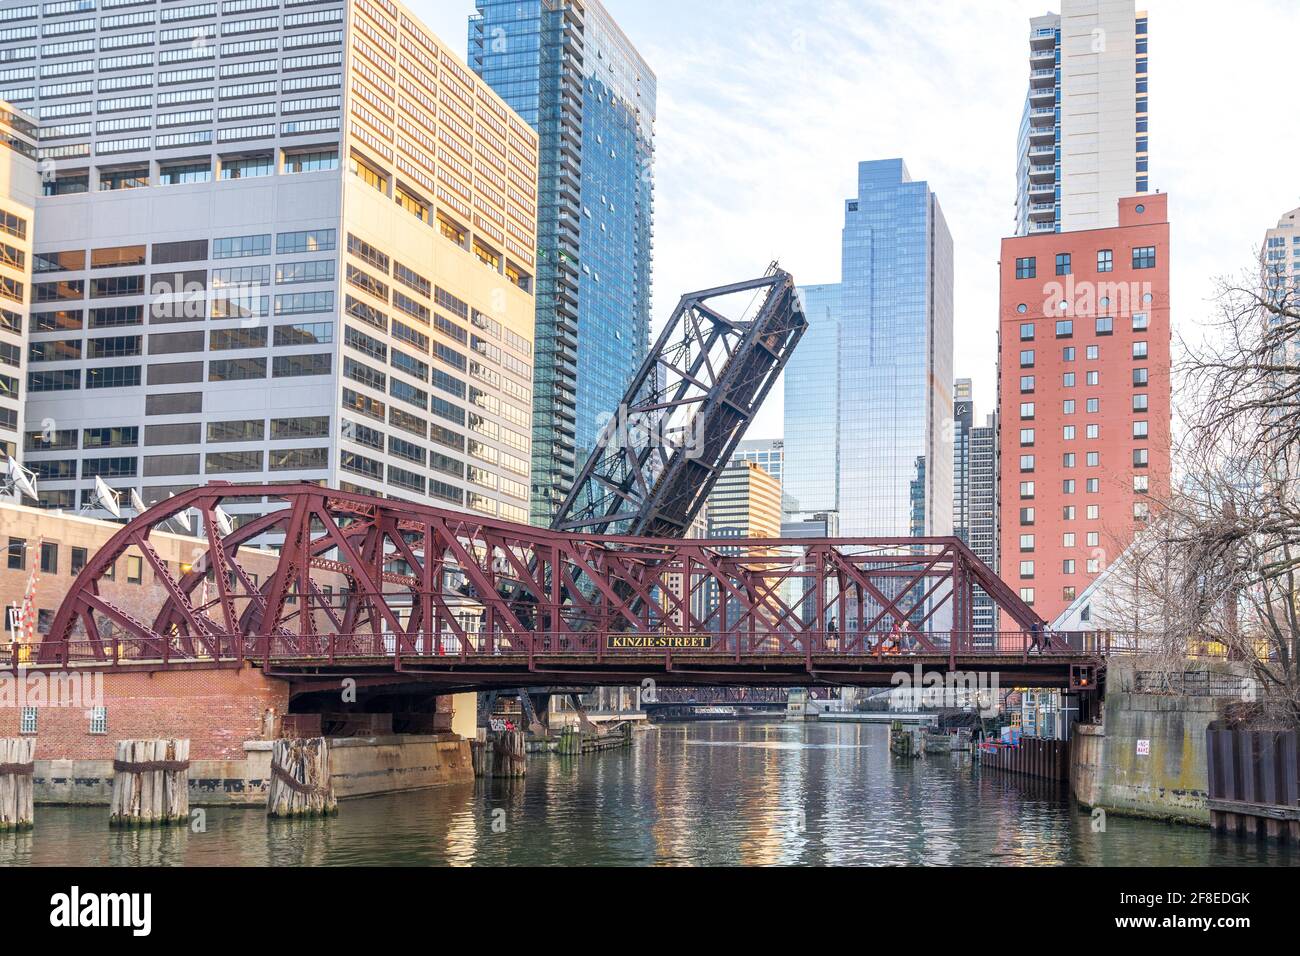 Panoramic Image of Kinzie Street's Drawbridge Taken from the Chicago River with the Chicago Skyline in the Background. Stock Photo